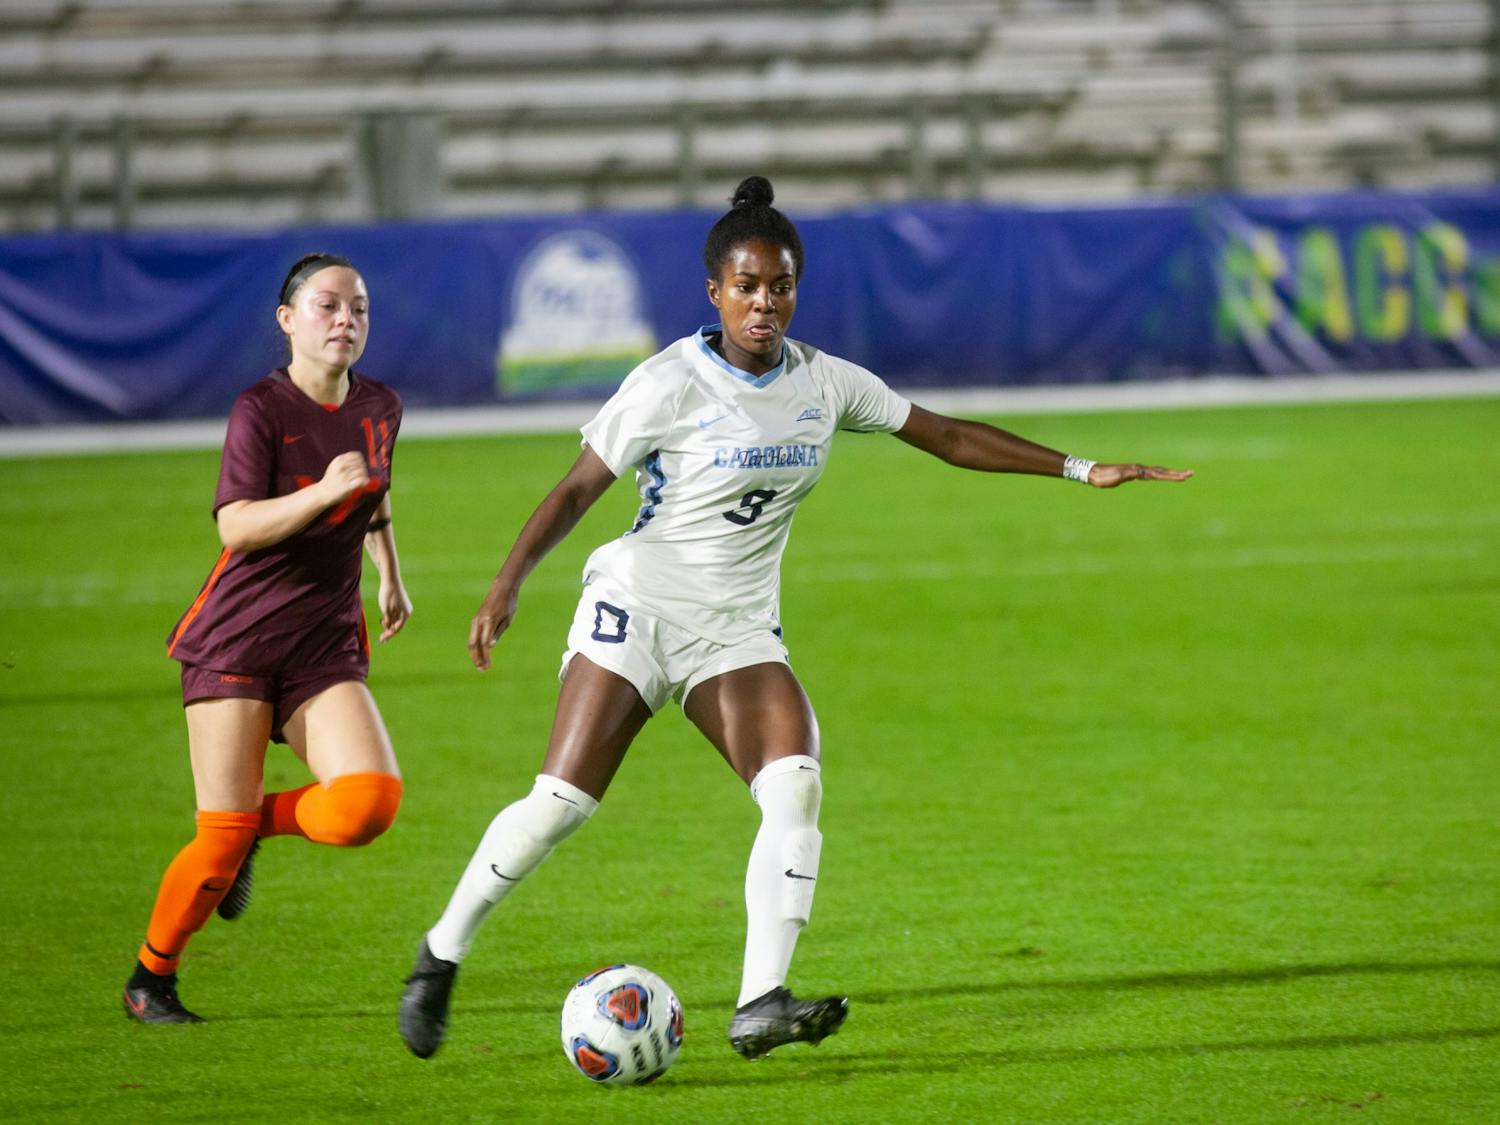 UNC junior midfielder Brianna Pinto (8) dribbles past Virginia Tech junior midfielder Grace Sklopin (11) during the first round of the ACC Tournament on Tuesday, Nov. 10, 2020 at the WakeMed Soccer Park. The Heels beat the Hokies 1-0.